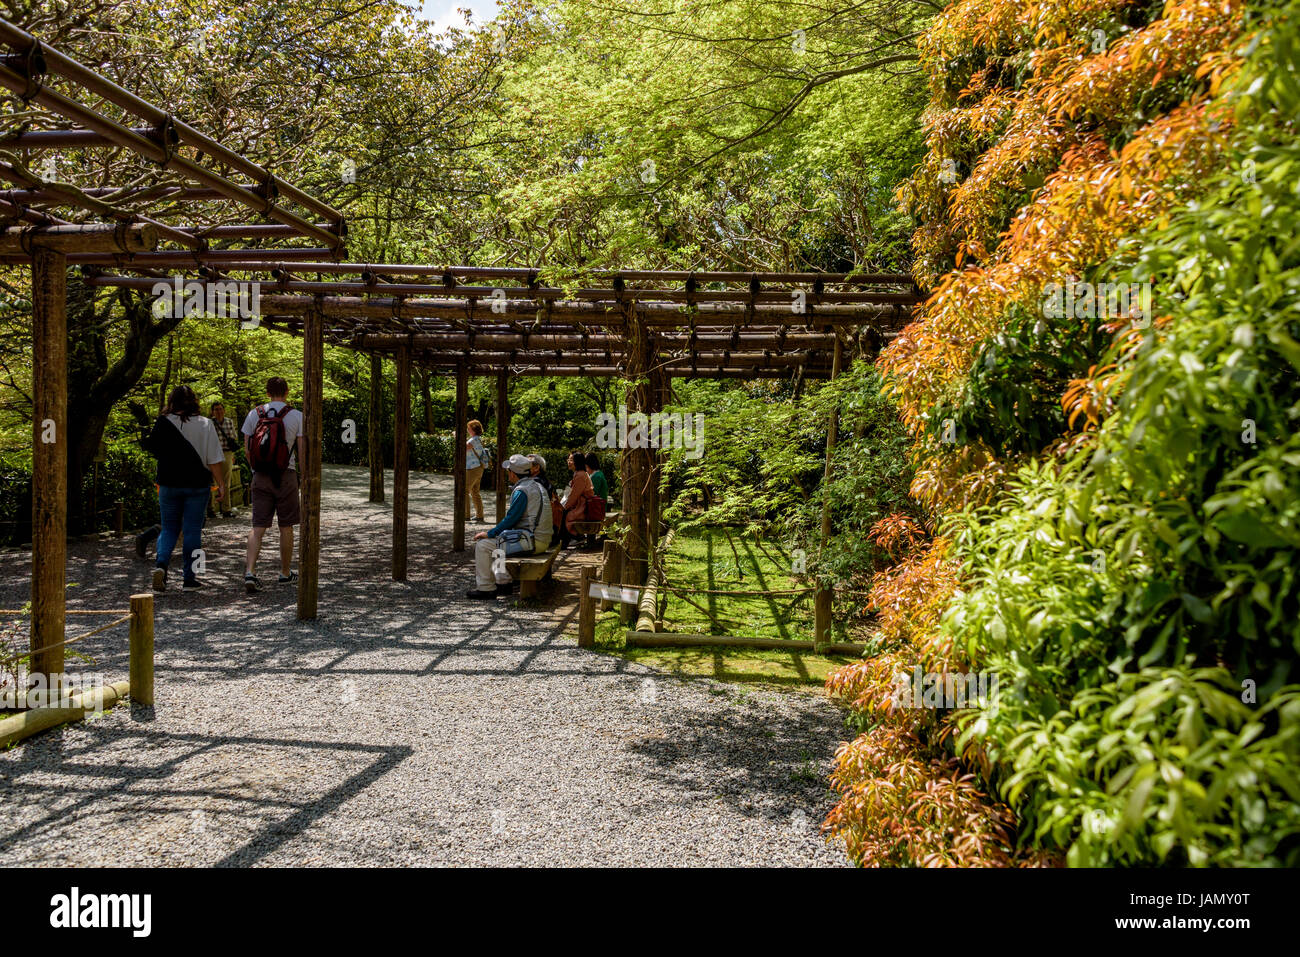 Pergola plant supports, offering shade and a seated area. Ryoanji gardens. Stock Photo